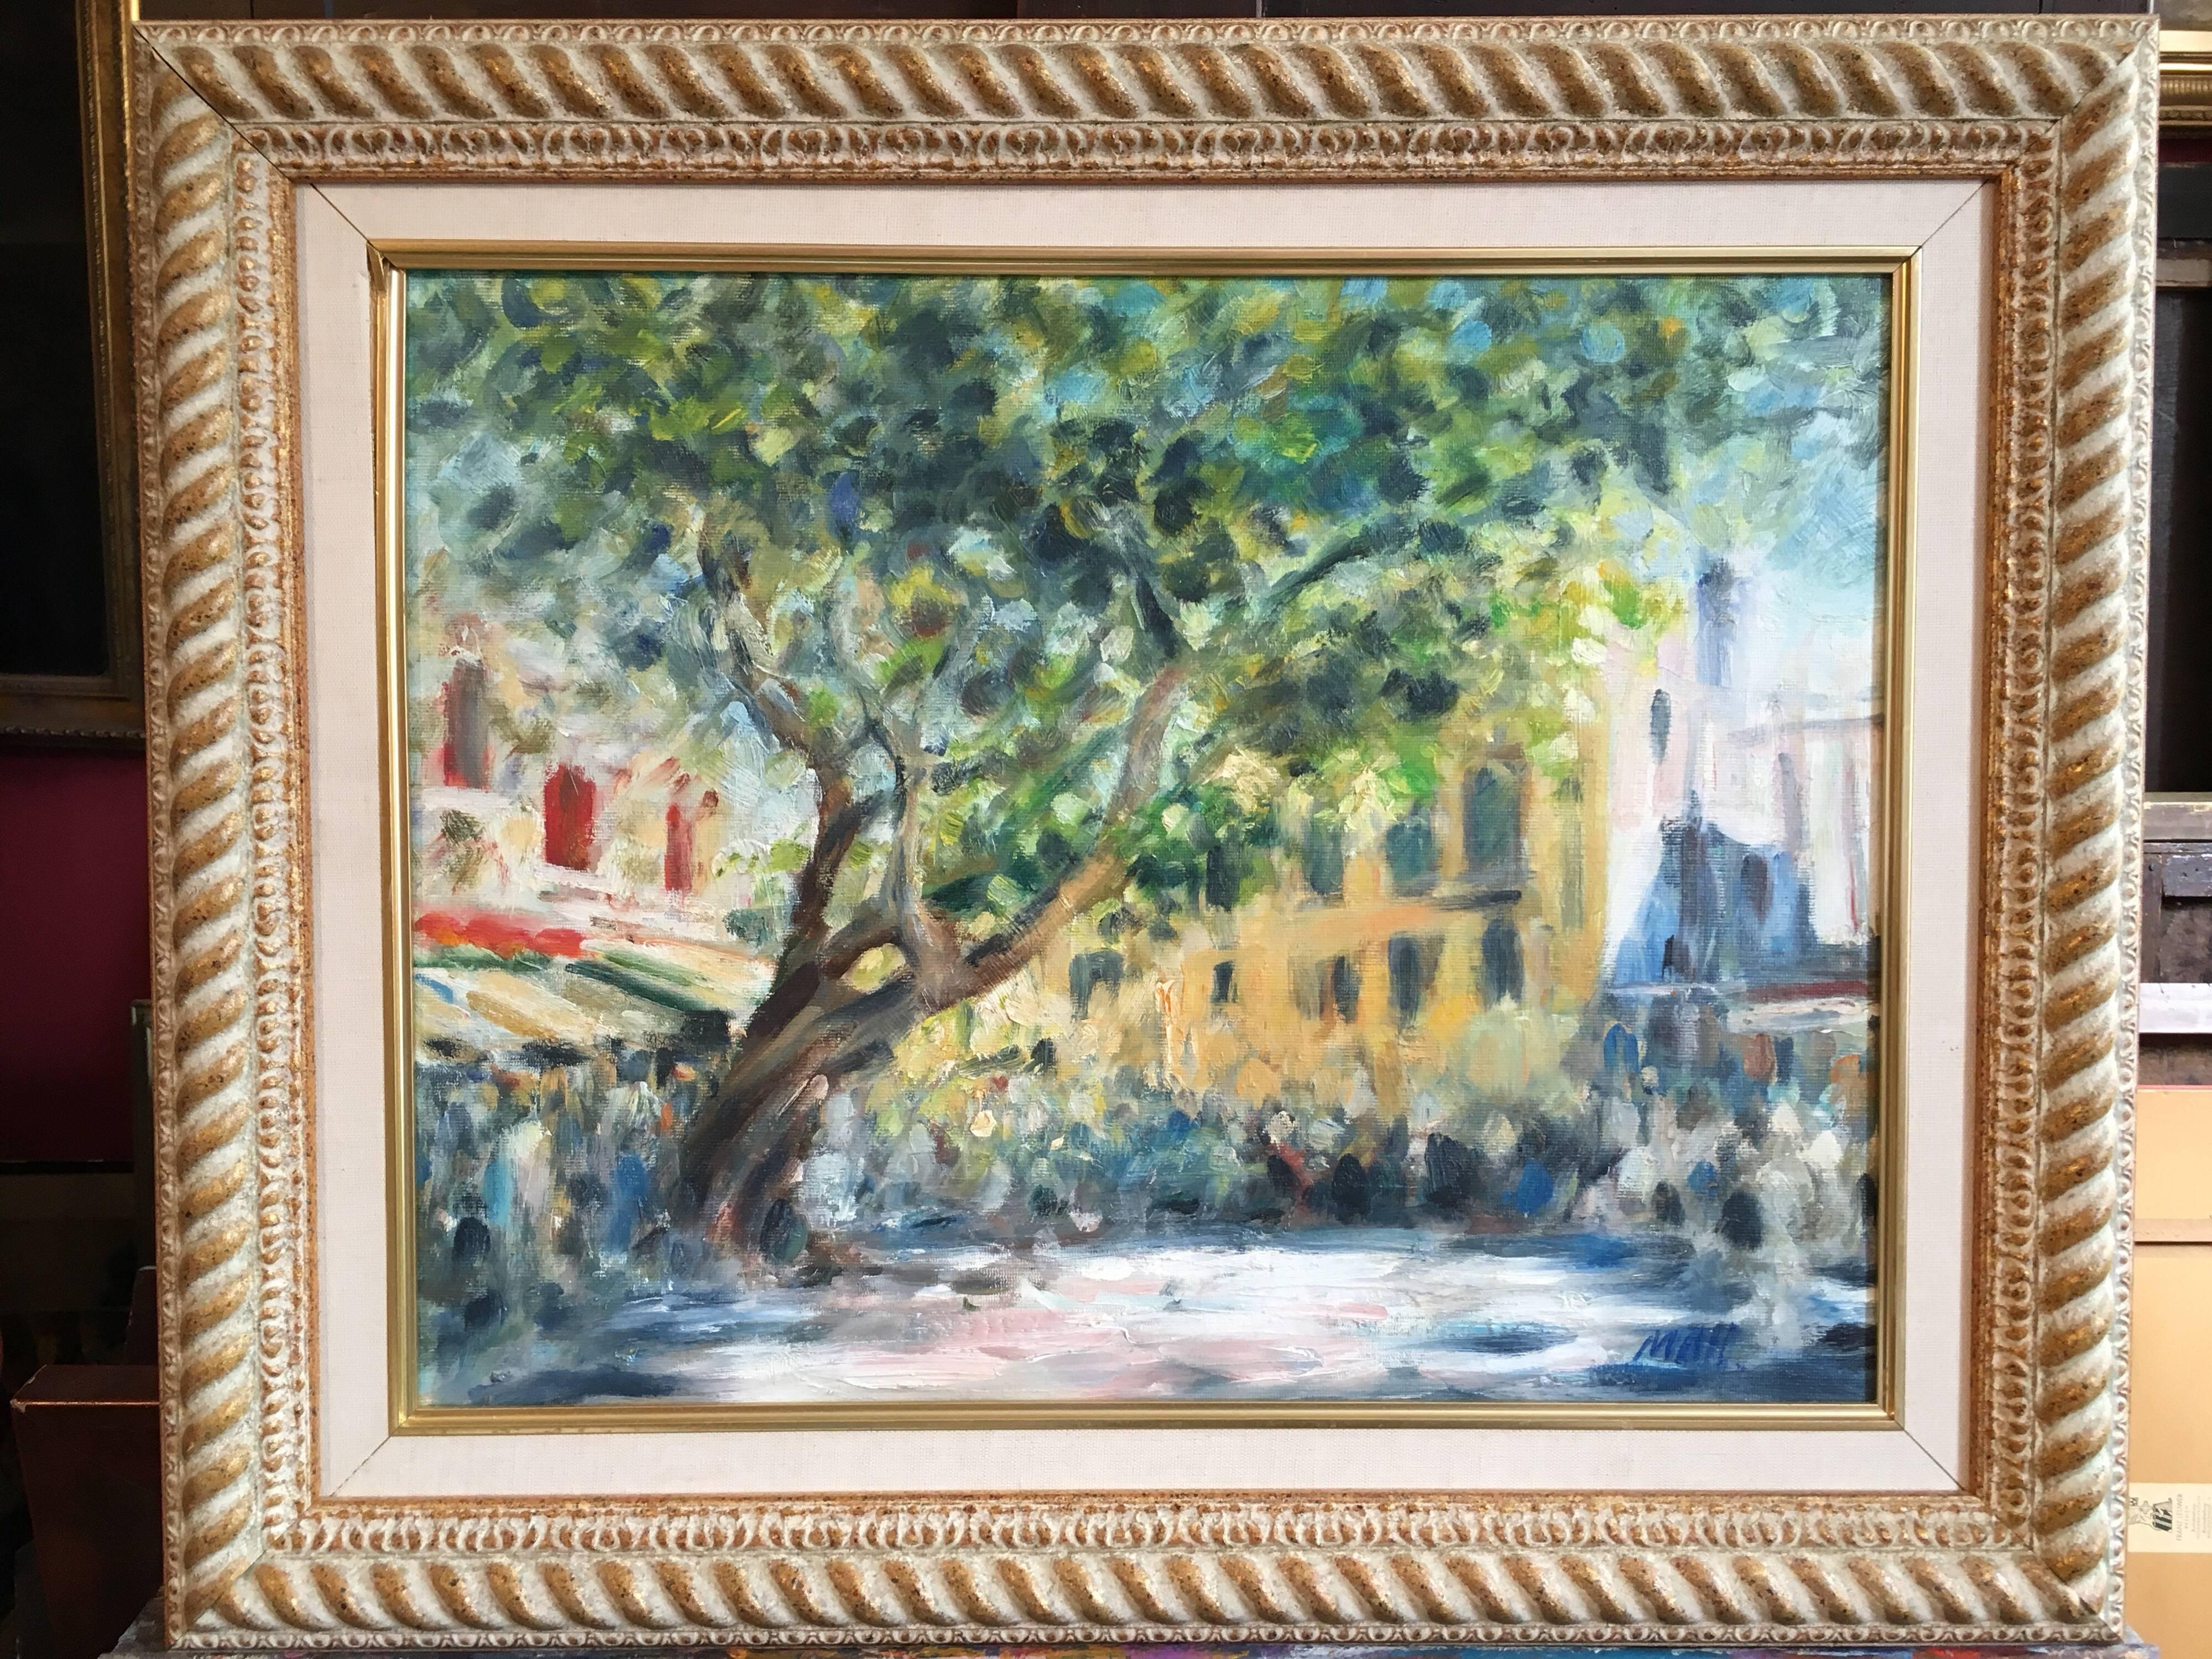 Impressionist Oil of a French Market Day - Gray Landscape Painting by Unknown